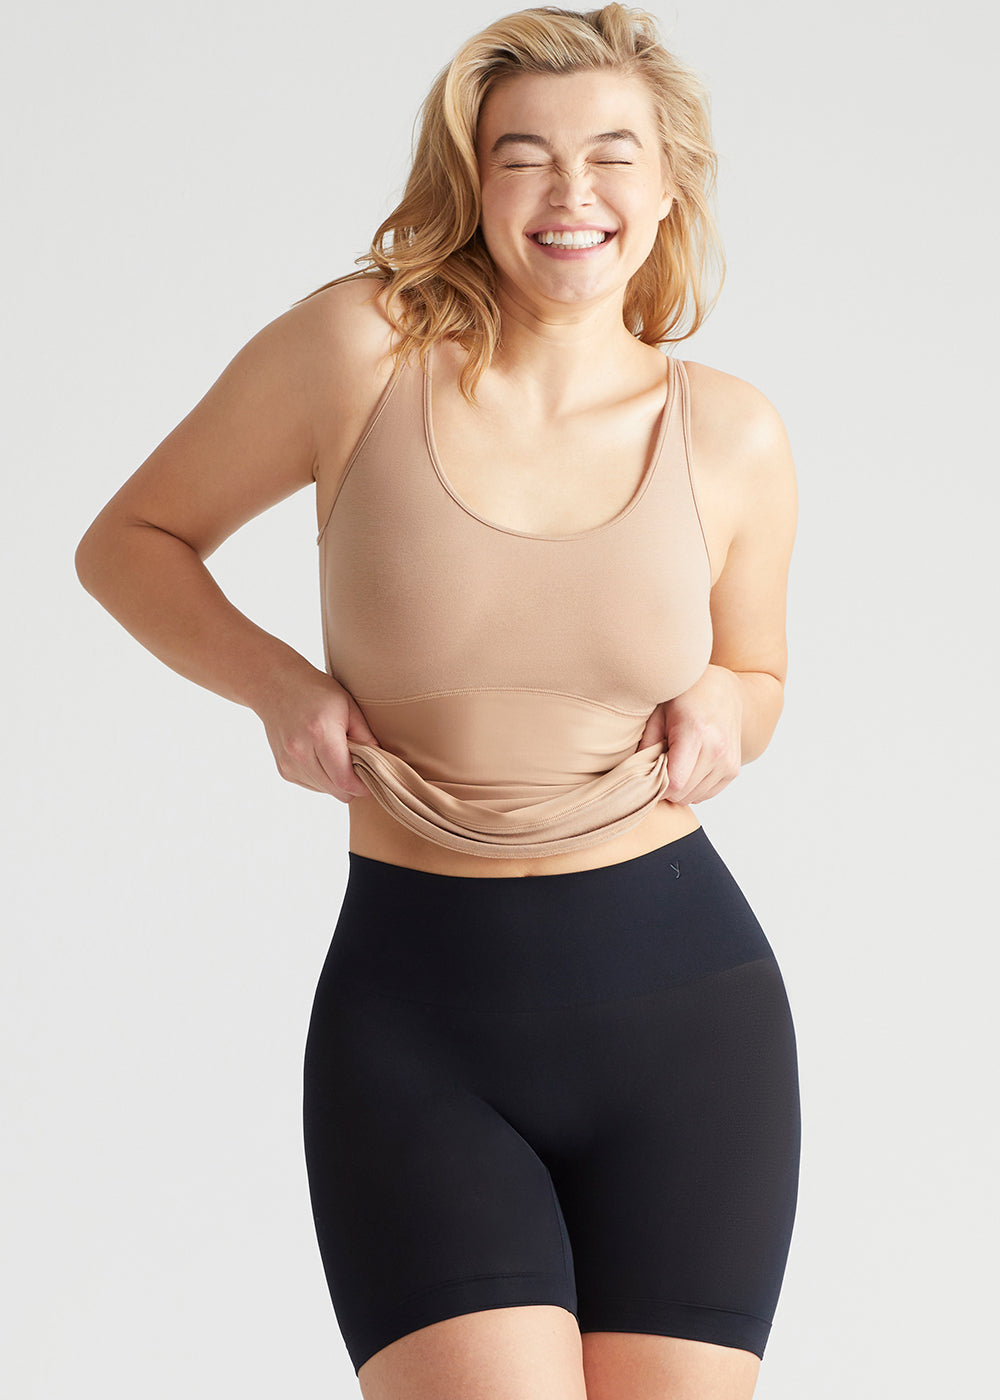 Affordable and Highly Reviewed Shapewear for Women Over 50 - 50 IS